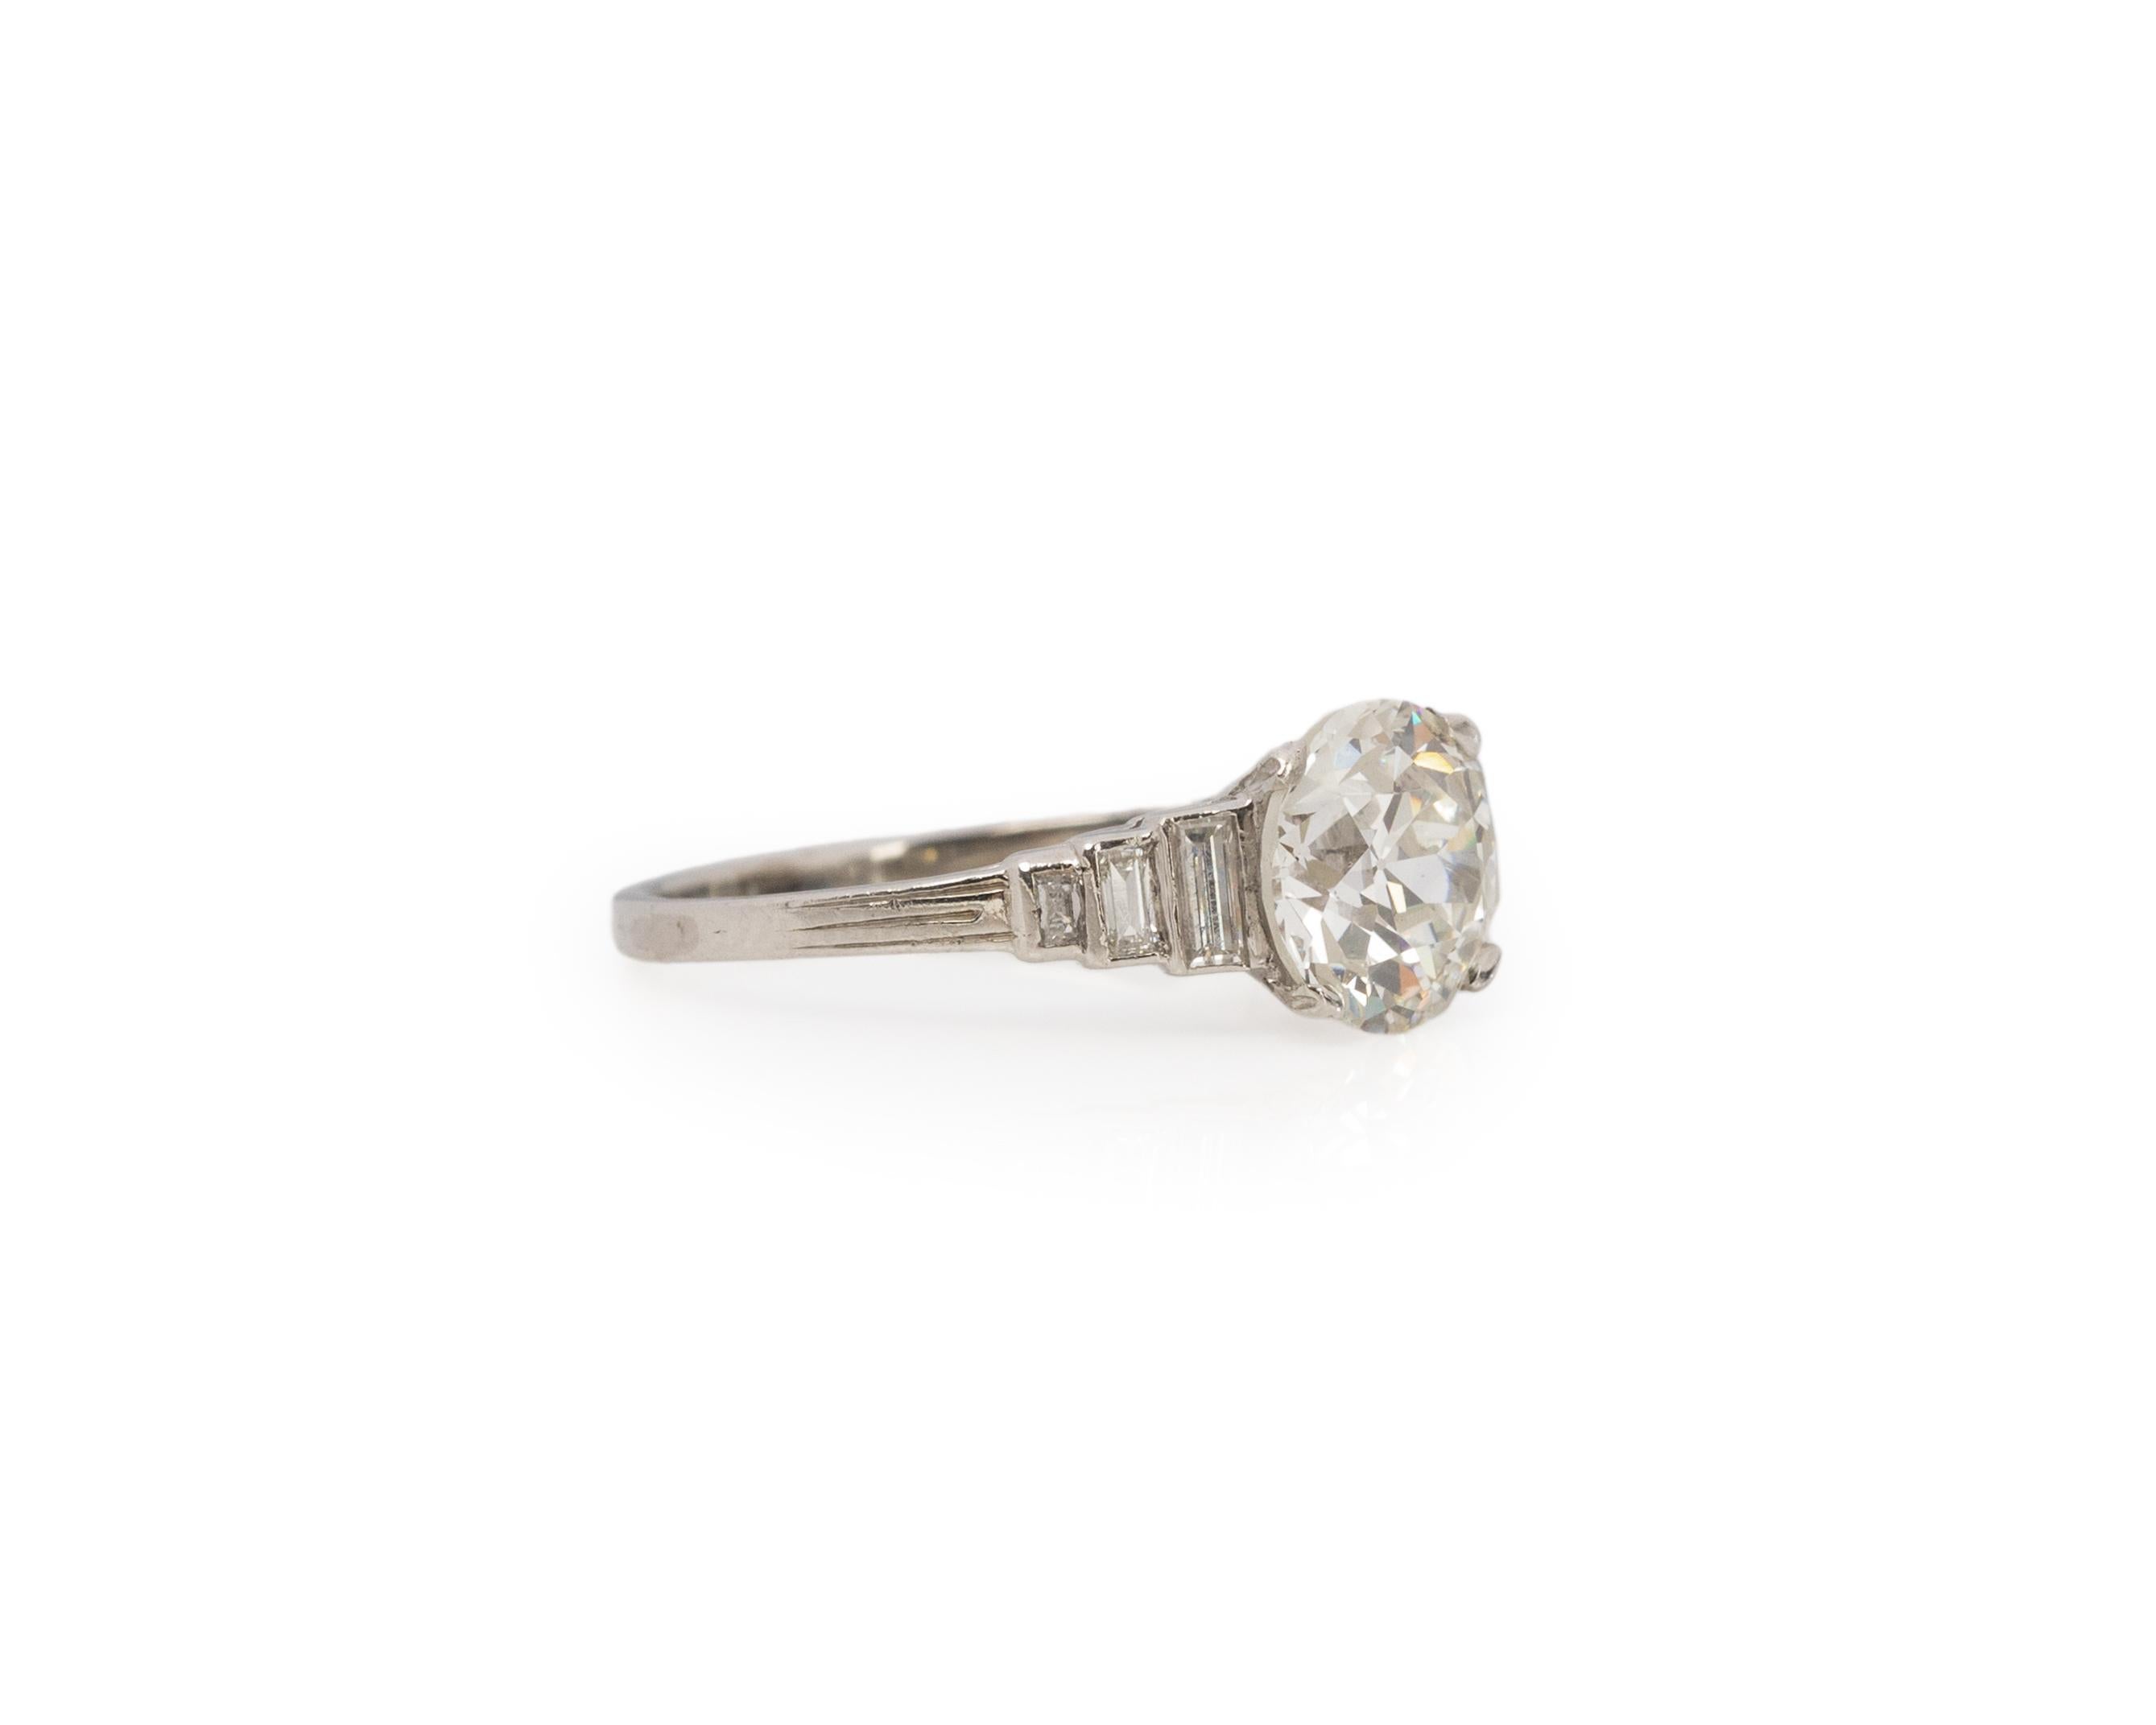 Ring Size: 6.25
Metal Type: Platinum [Hallmarked, and Tested]
Weight: 3.3grams

Center Diamond Details:
GIA LAB REPORT #: 5221843577
Weight: 1.91ct
Cut: Old European brilliant
Color: J
Clarity: VS1
Measurements: 7.93mm x 7.83mm x 4.76mm

Side